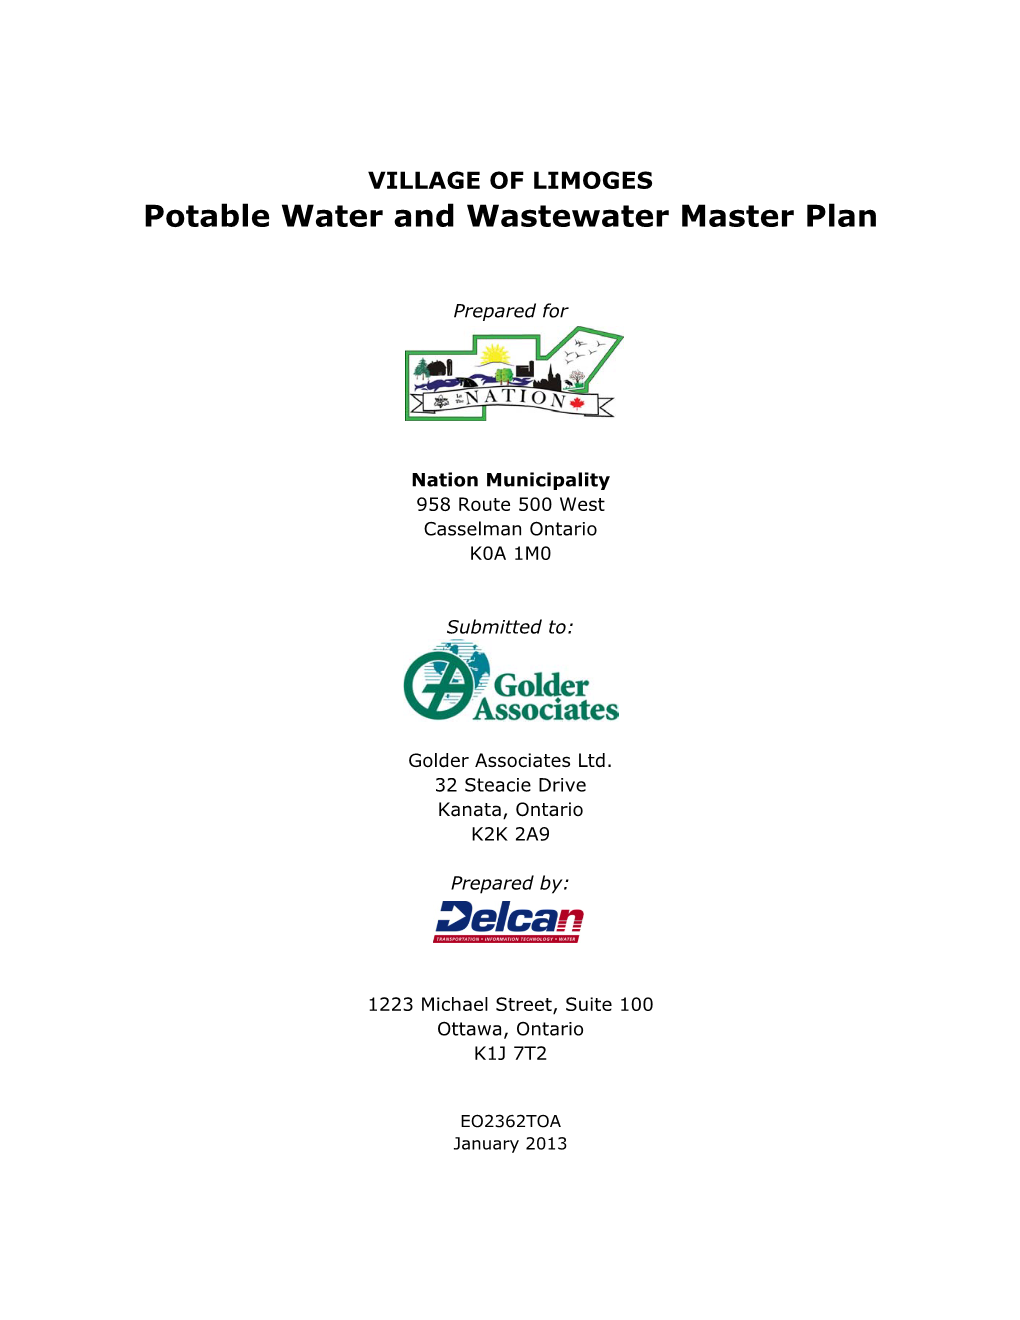 Potable Water and Wastewater Master Plan